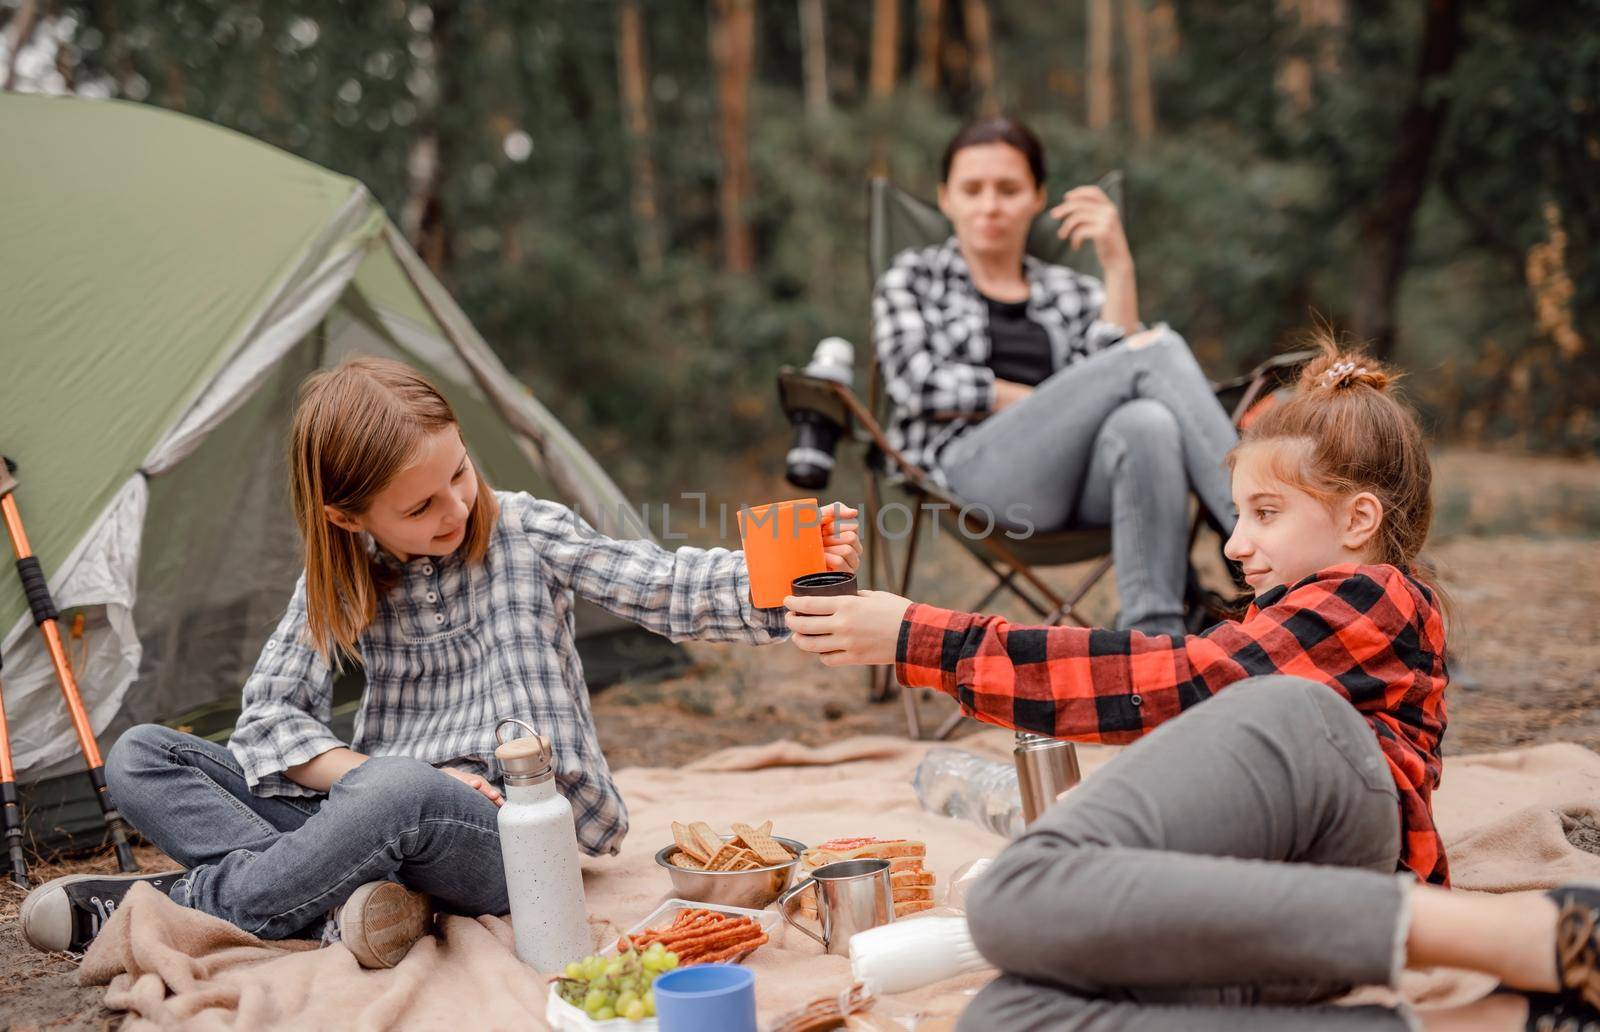 Beautiful girls sisters drinking tea in camping in forest with tent and smiling while their mother sitting and looking at them. Young mother and her daughters resting with picnic in the wood